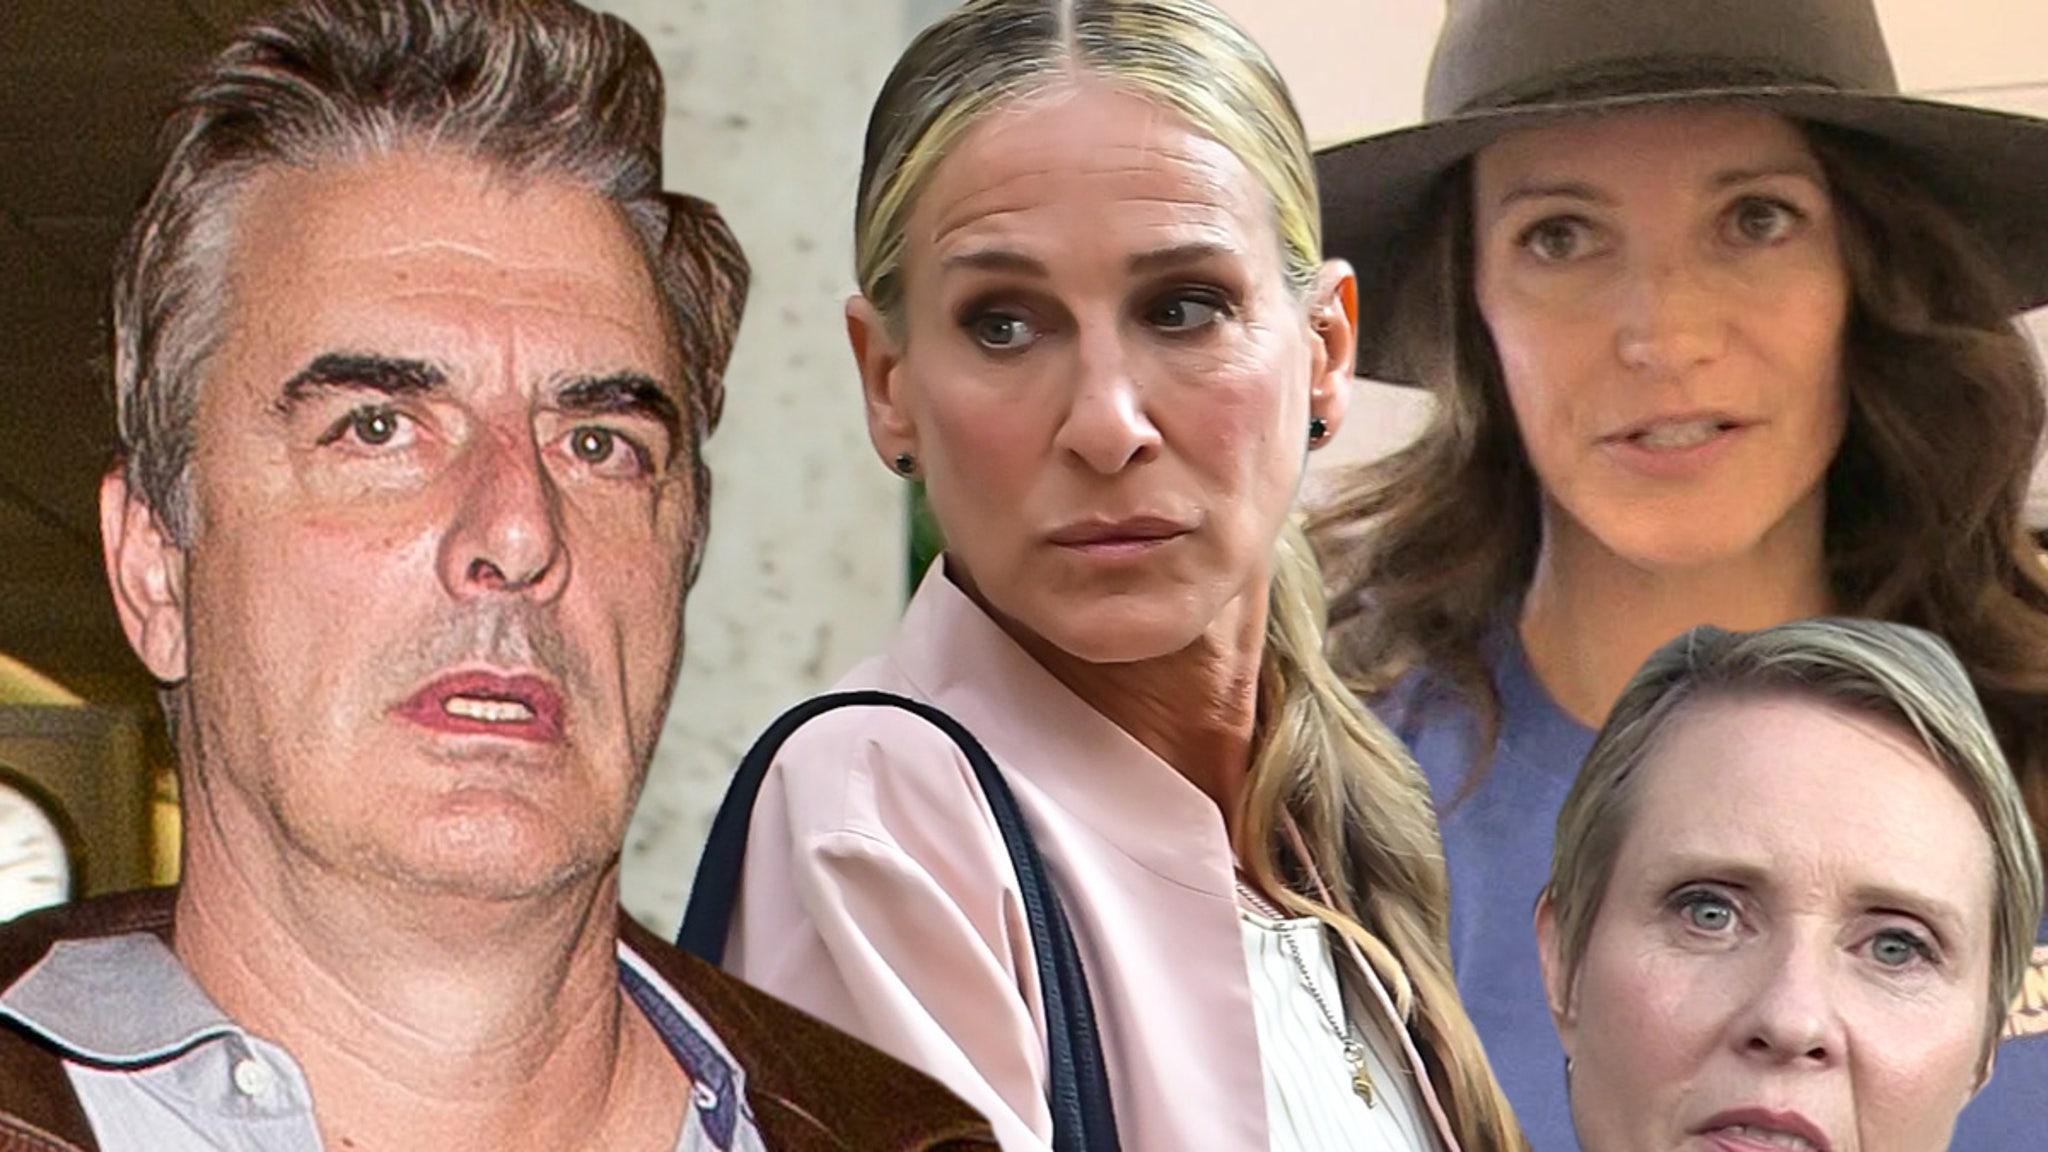 Sarah Jessica Parker ‘Deeply Saddened’ By Chris Noth Sexual Assault Allegations